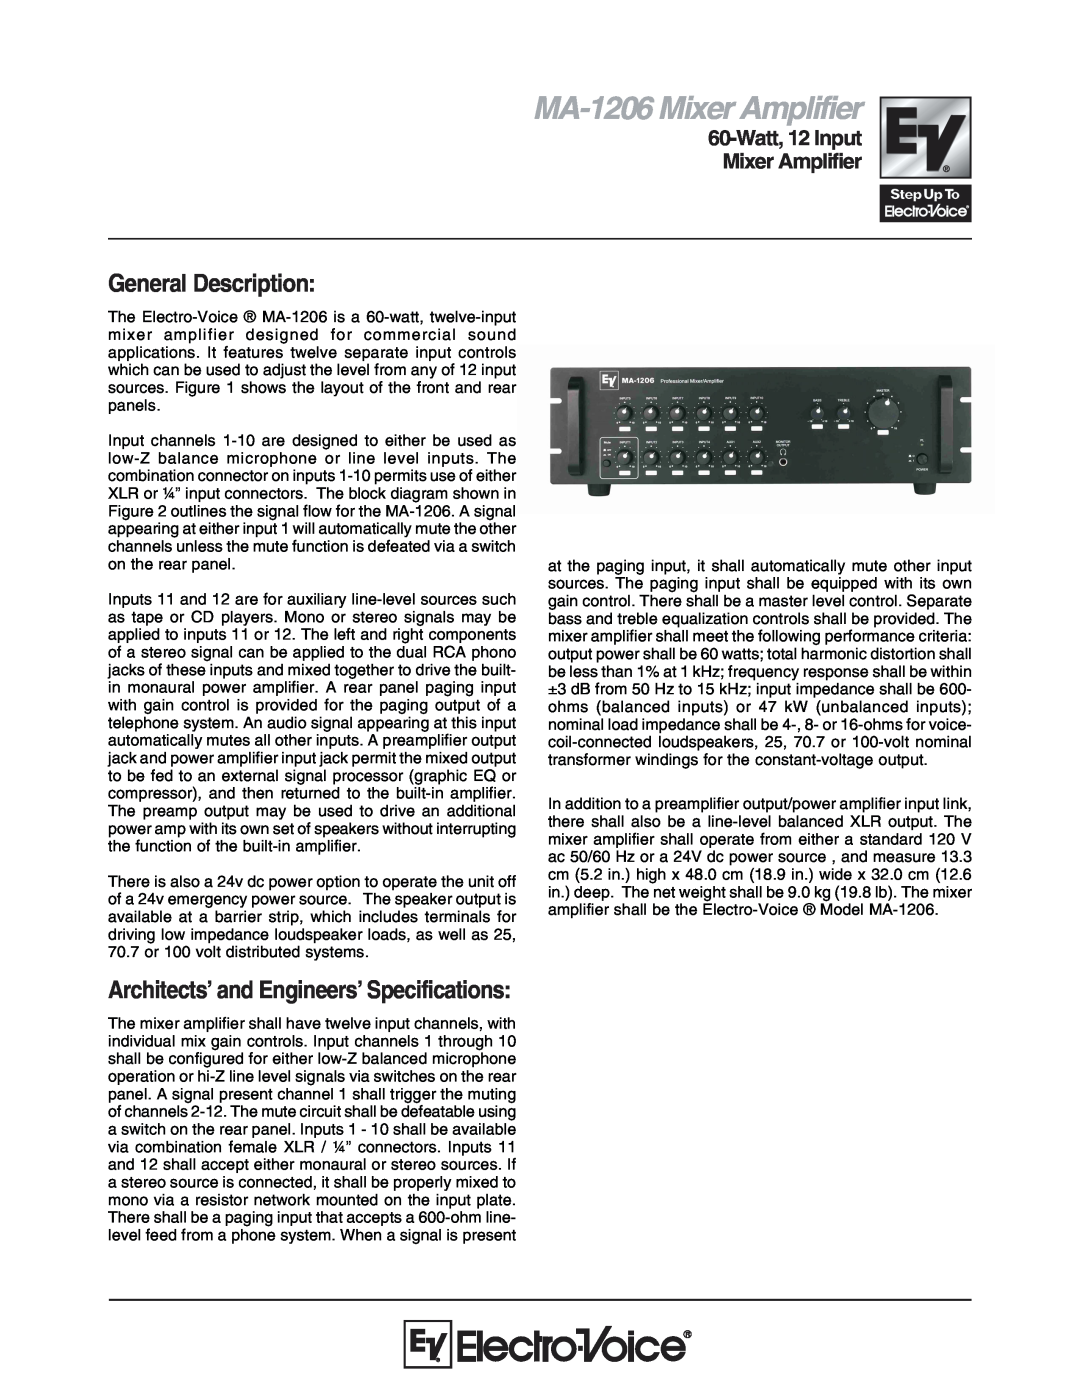 Electro-Voice MA-1206 specifications General Description, Architects’ and Engineers’ Specifications 